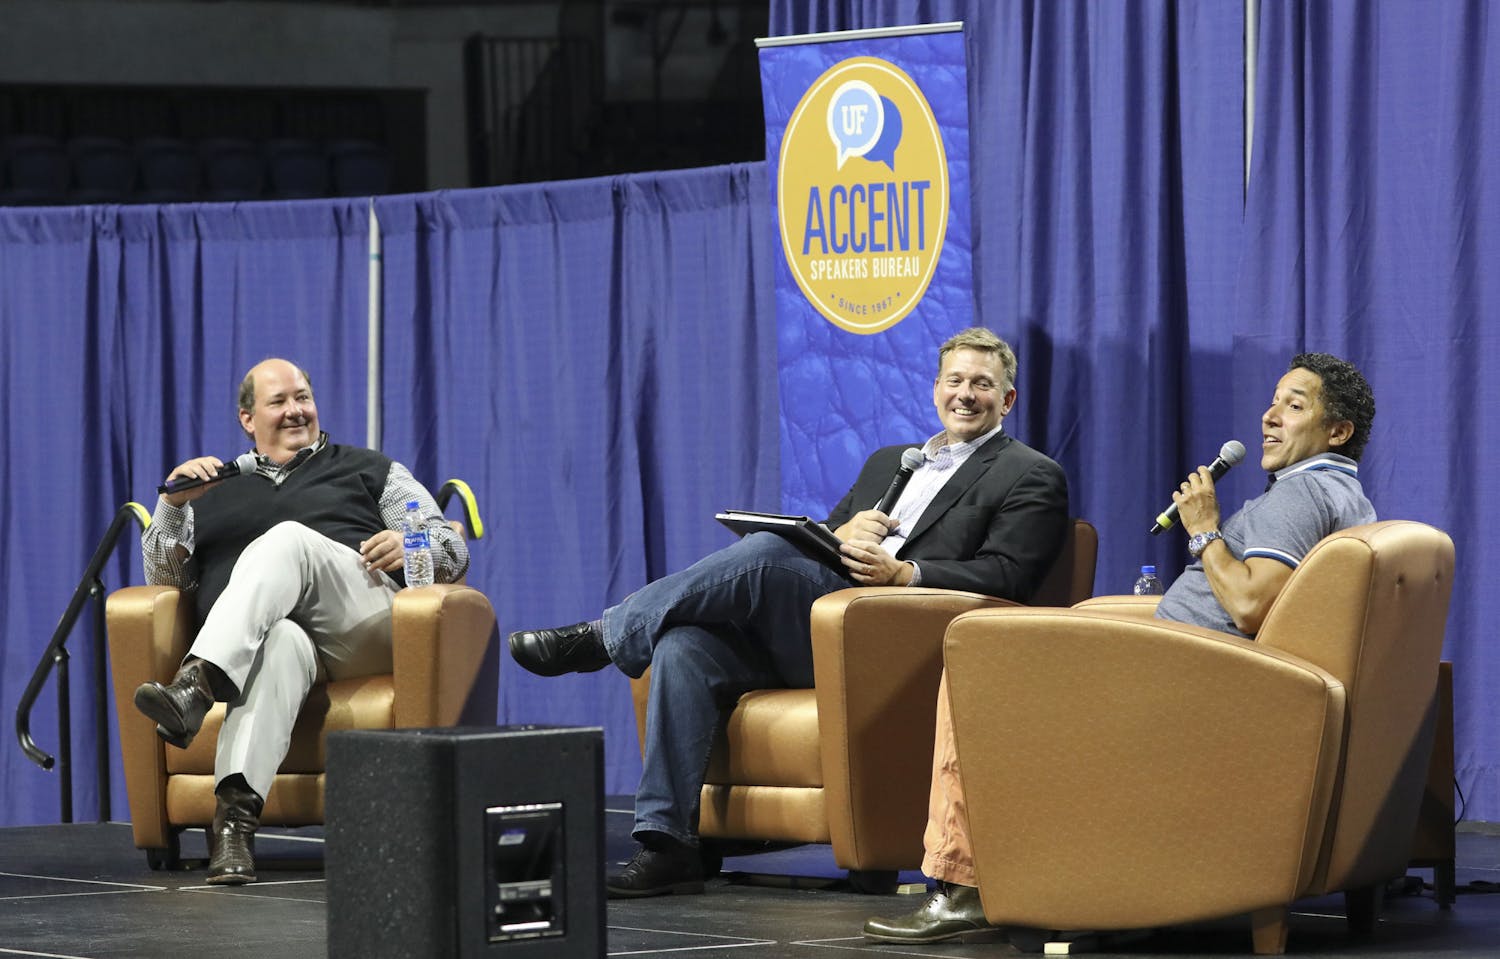 UF journalism professor Ted Spiker (center) moderates a conversation with ACCENT Speakers Bureau guests Brian Baumgartner (left) and Oscar Nuñez (right) on Wednesday, June 30, 2021. The event is the first fully in-person Accent event since October 10, 2019, before the COVID-19 pandemic. 